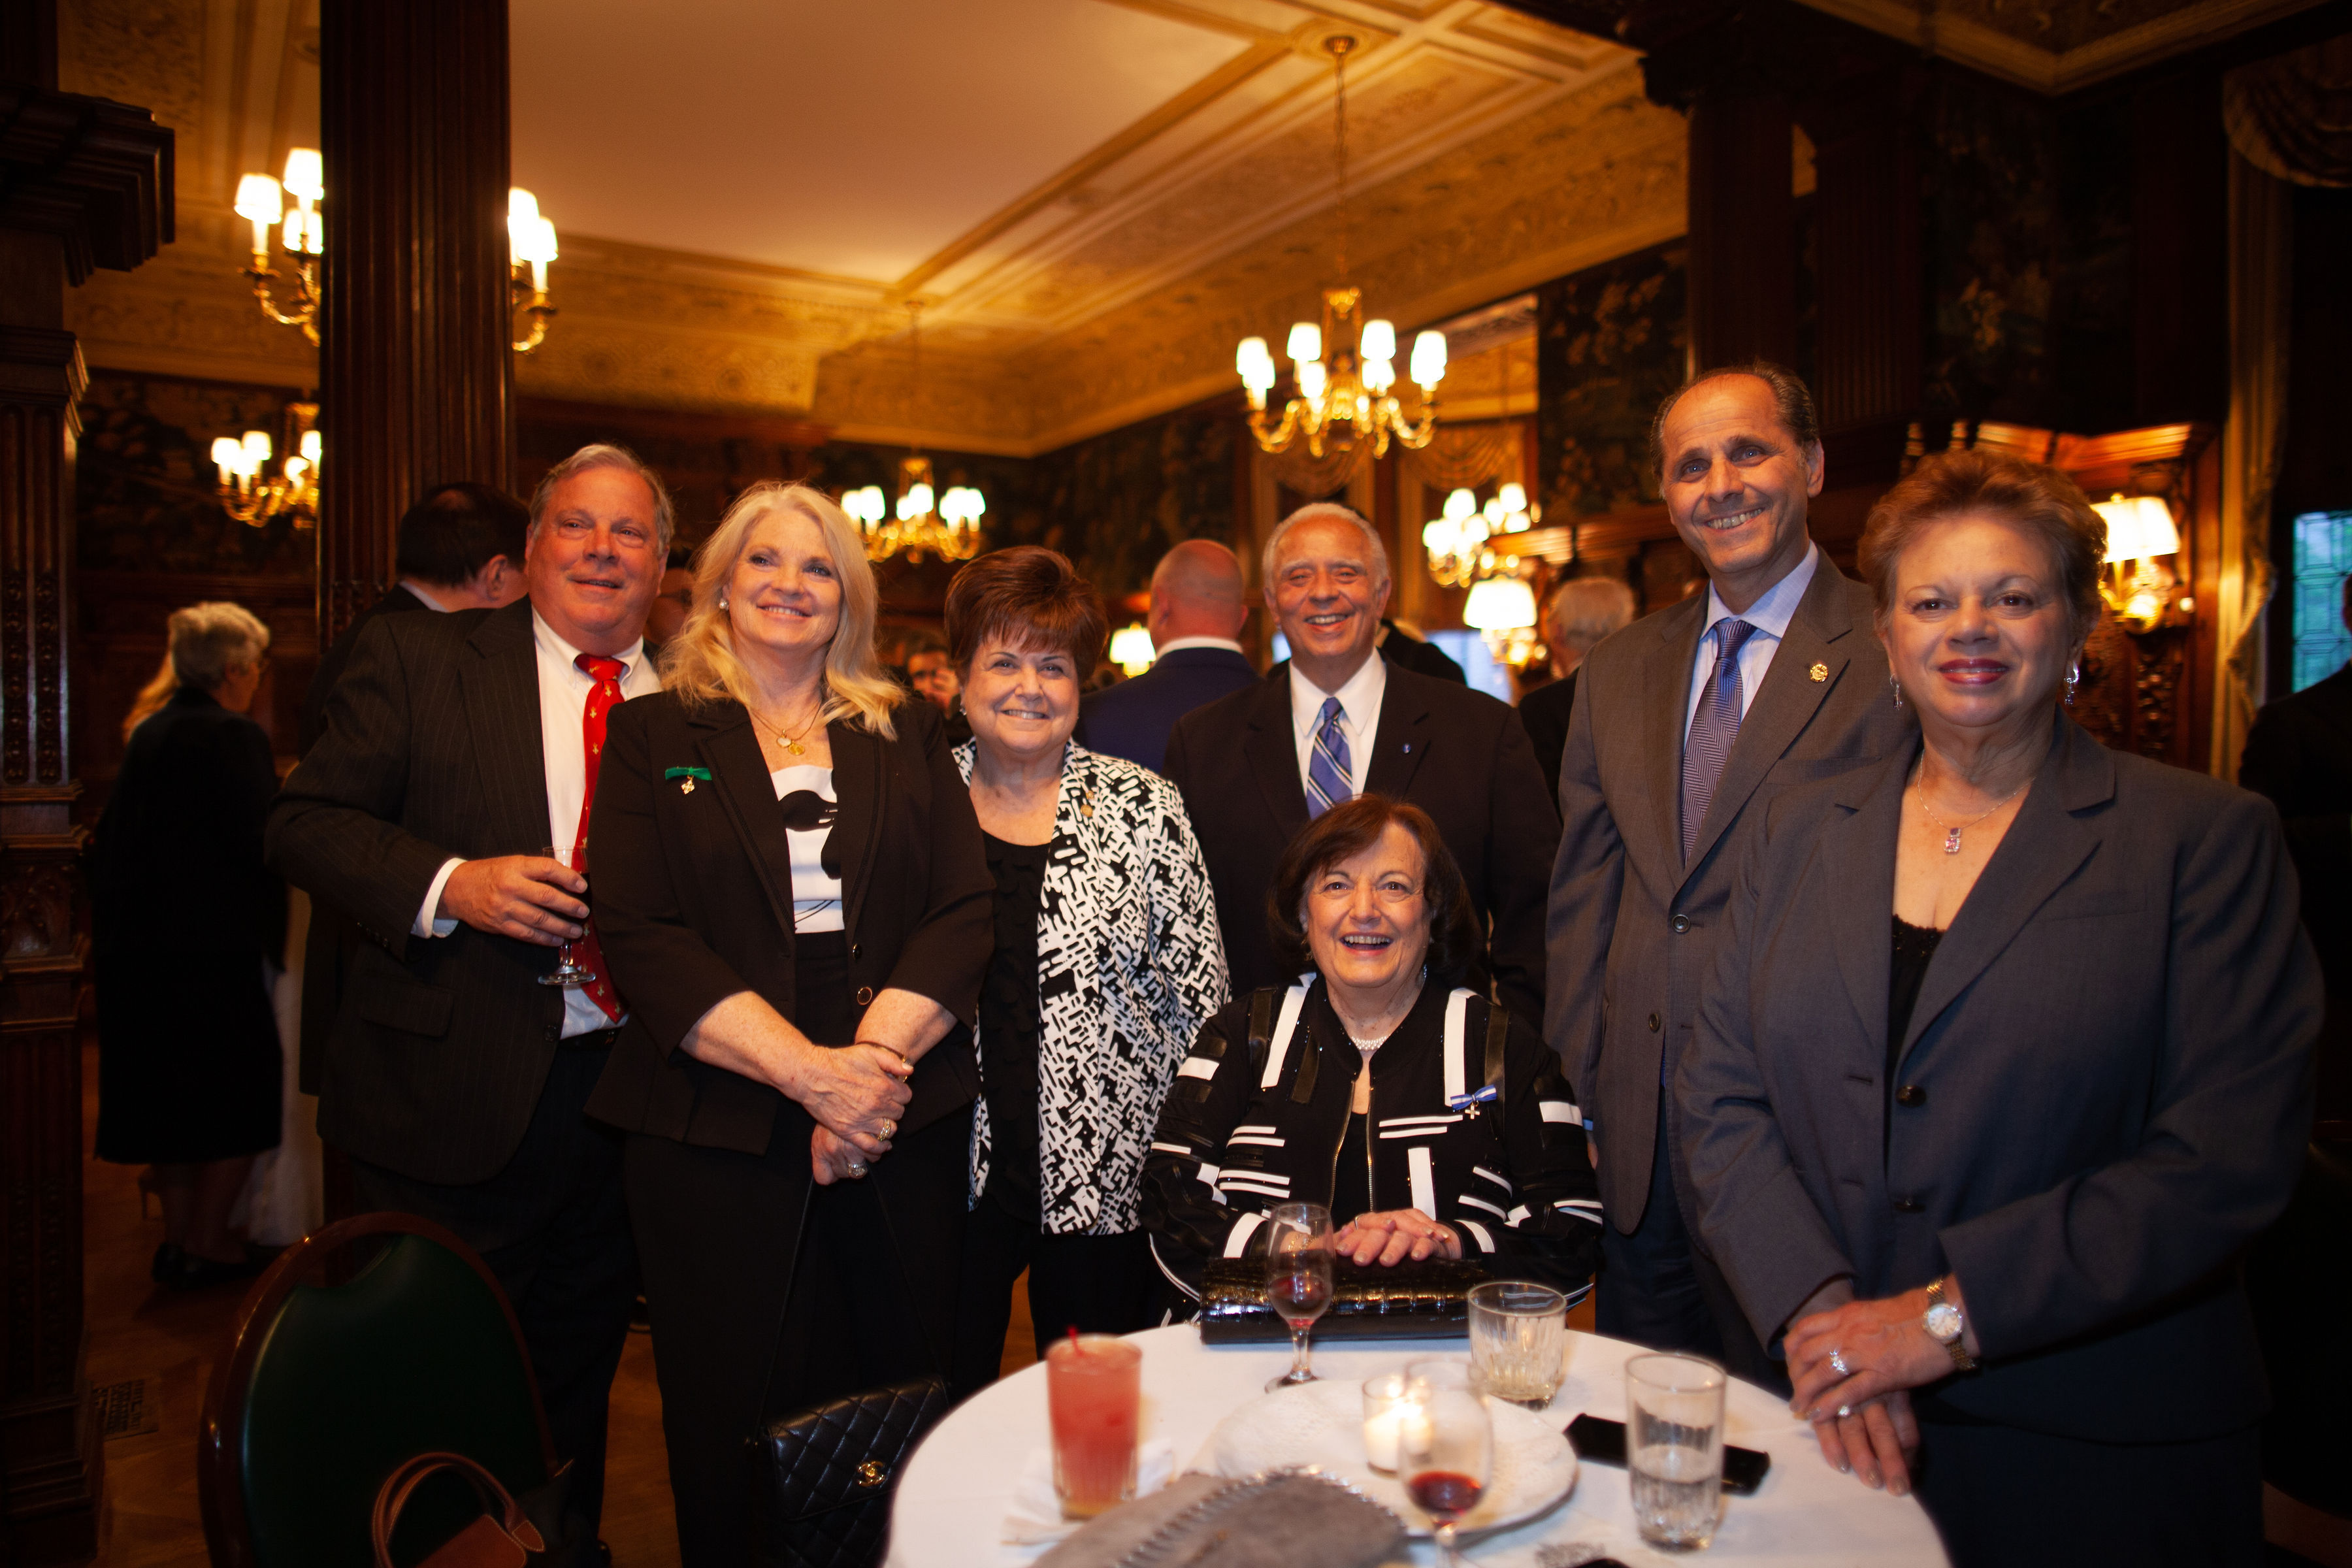 Dr. William and Mrs. Andrea Caccese, Nancy DiFiore Quinn, F. Anthony Naccarato, Robert Ferrito, Mary Naccarato, Carolyn Reres (seated)